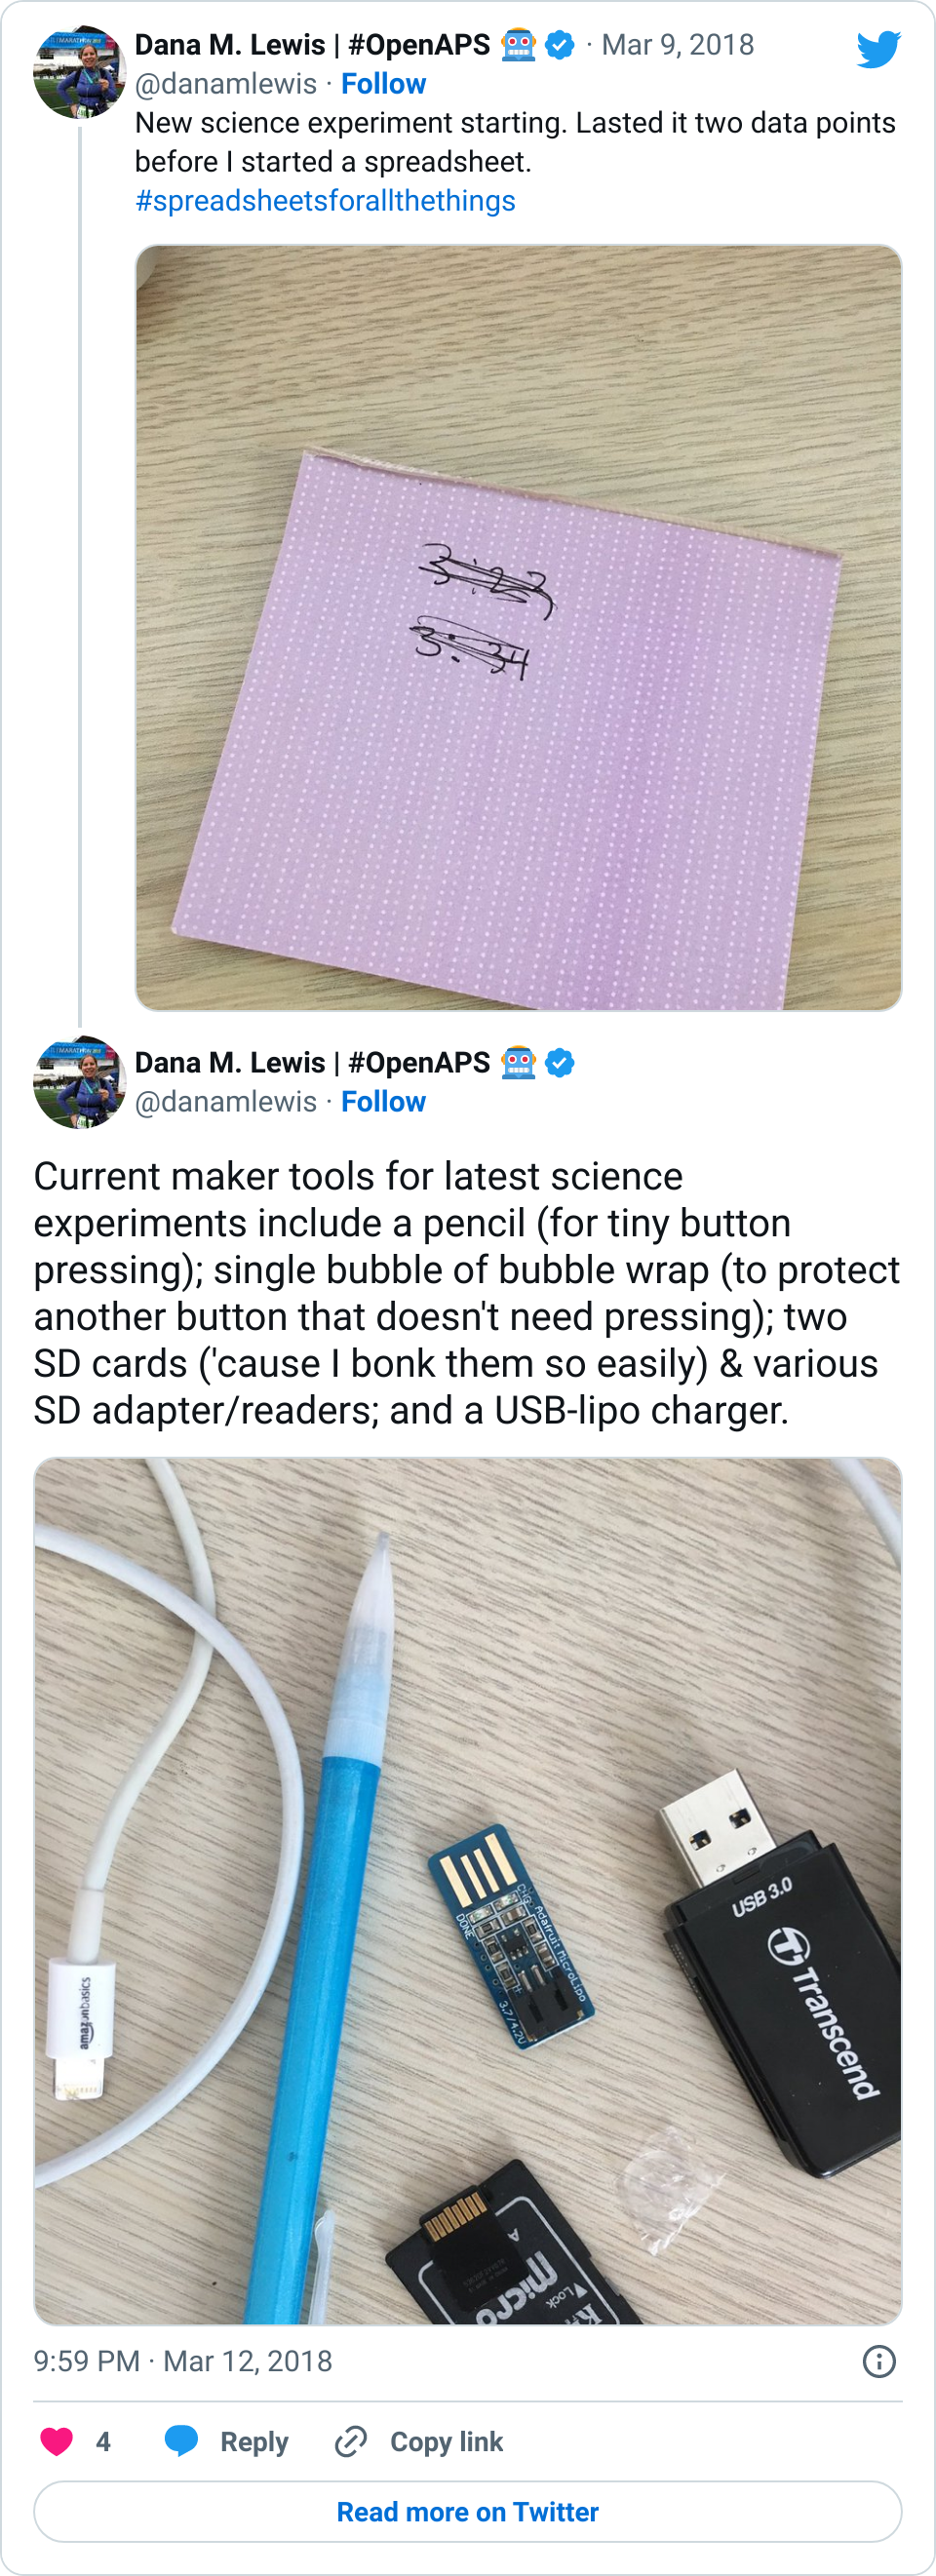 Sticky notes with data scratched out and a USB stick with data from non-diabetes science experiments